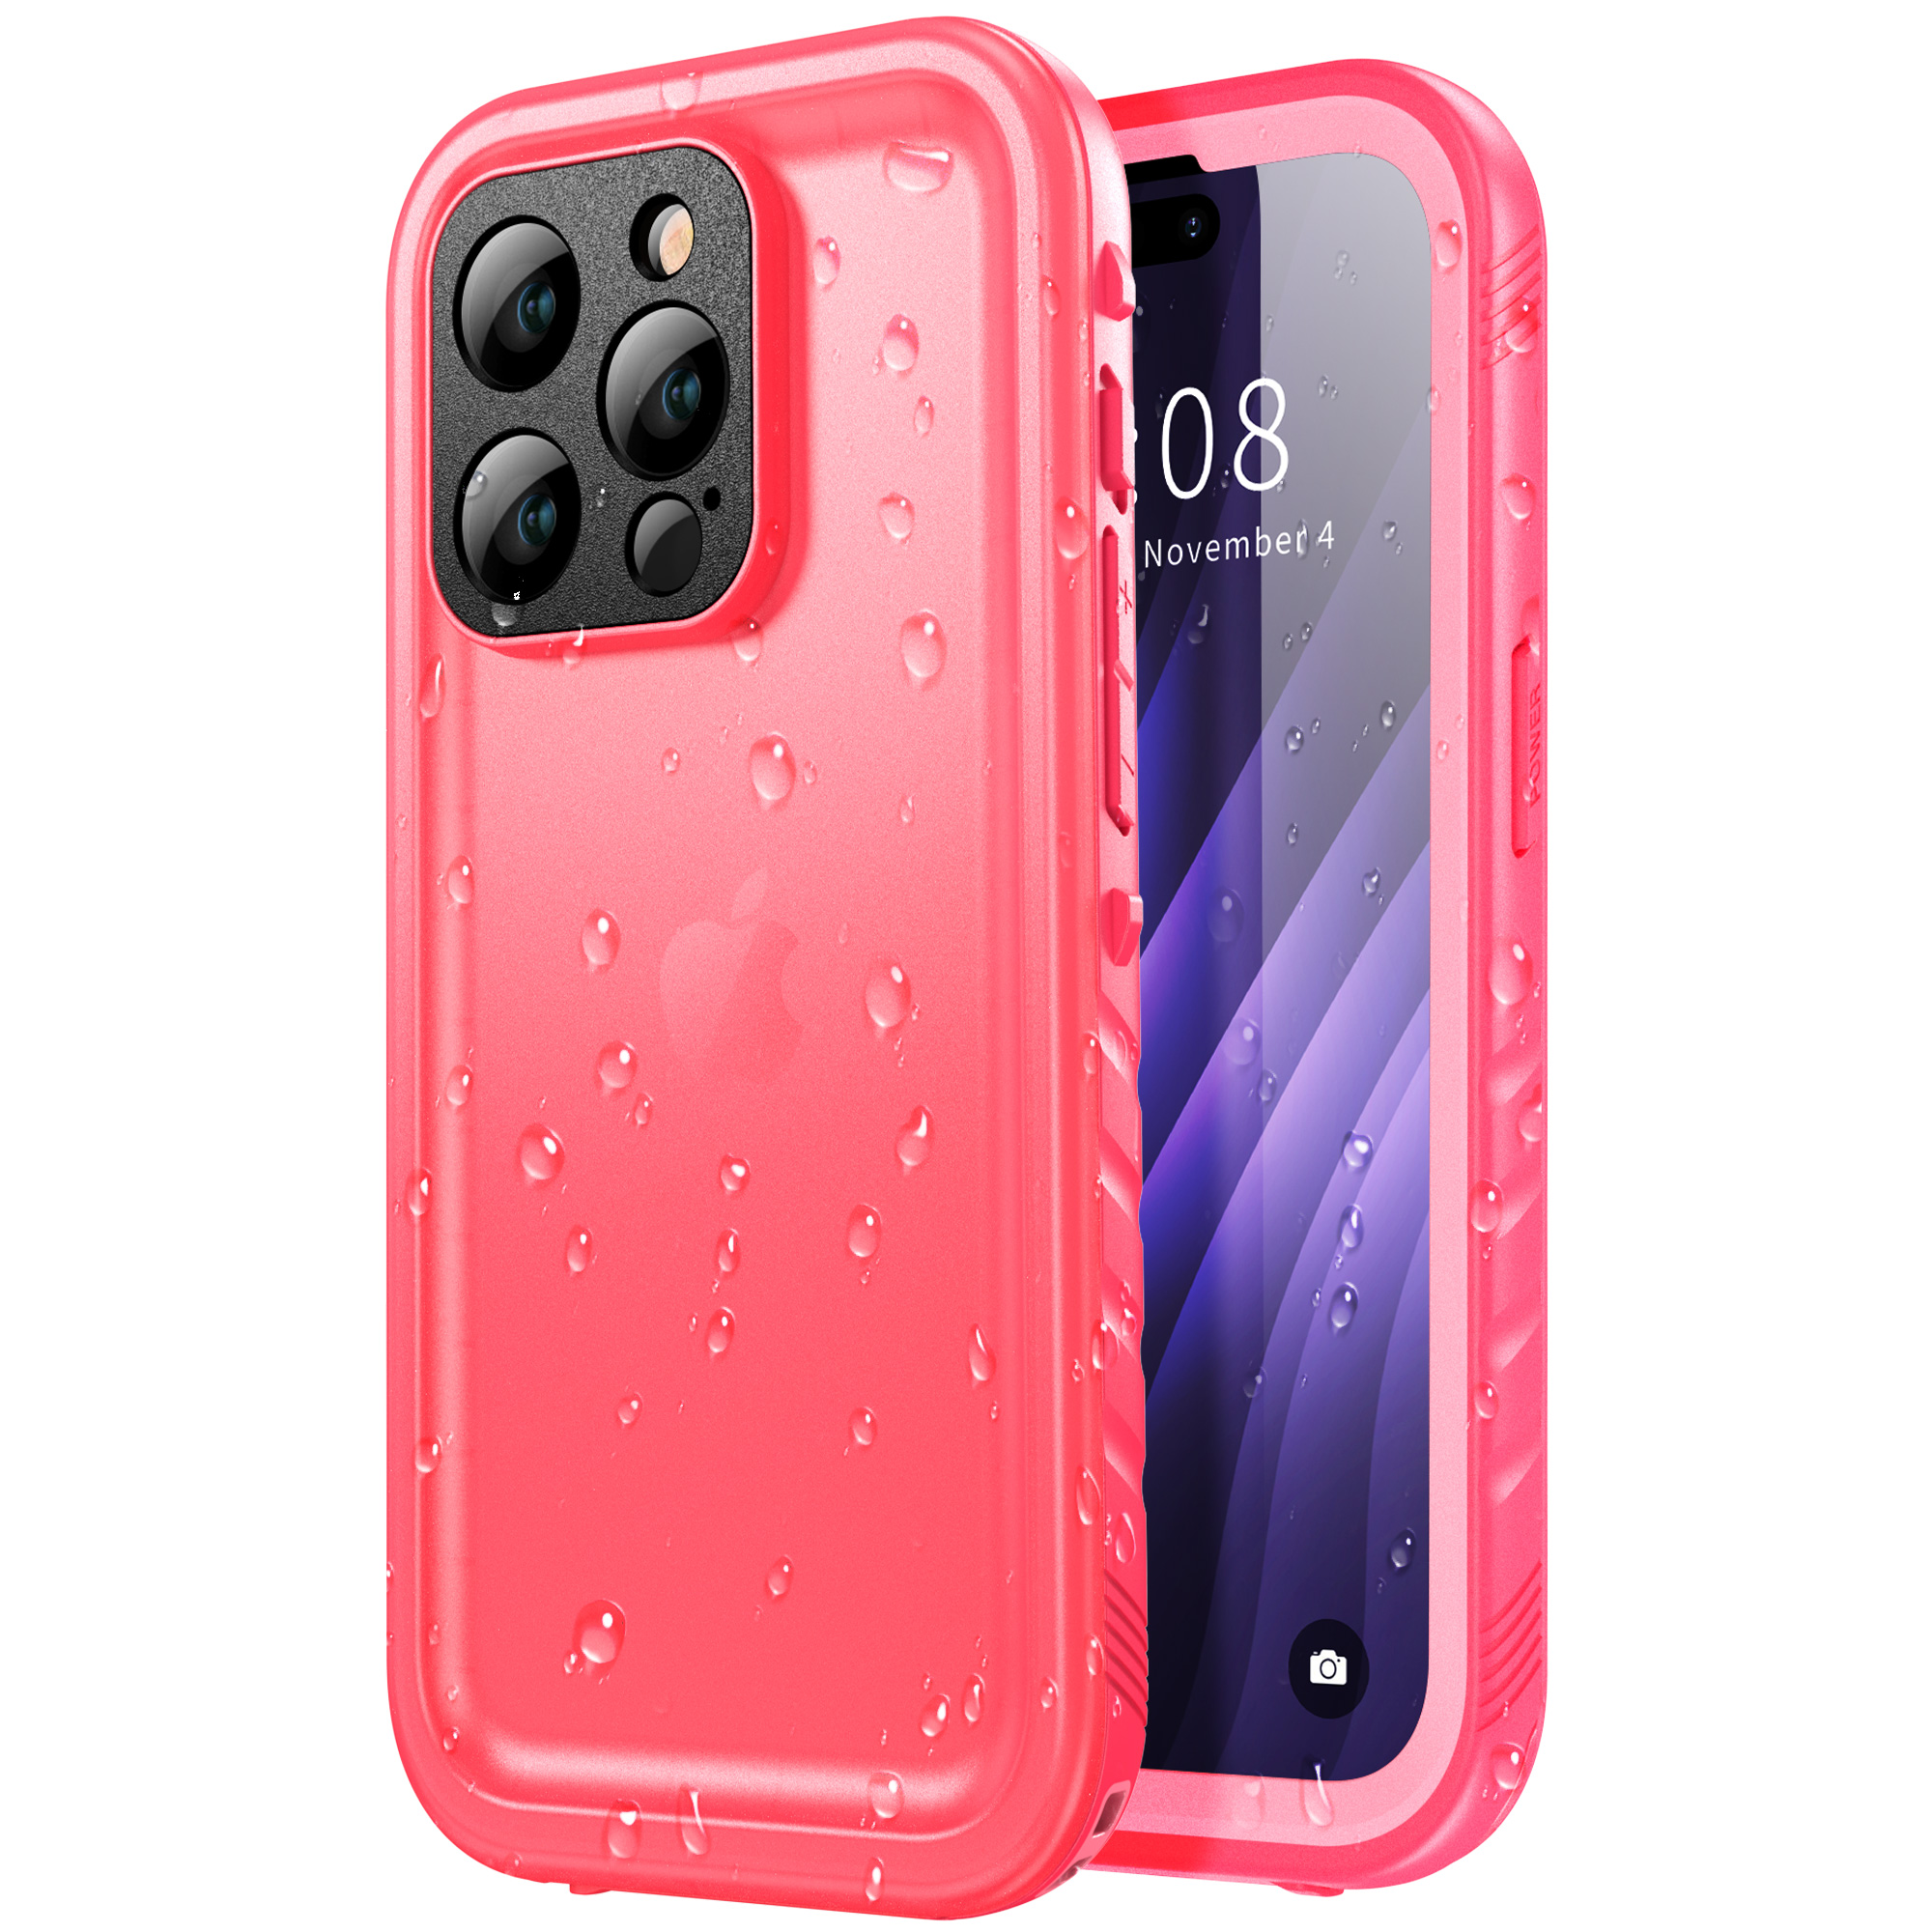 This pack contains a waterproof, shockproof case for iPhone 11 Pro